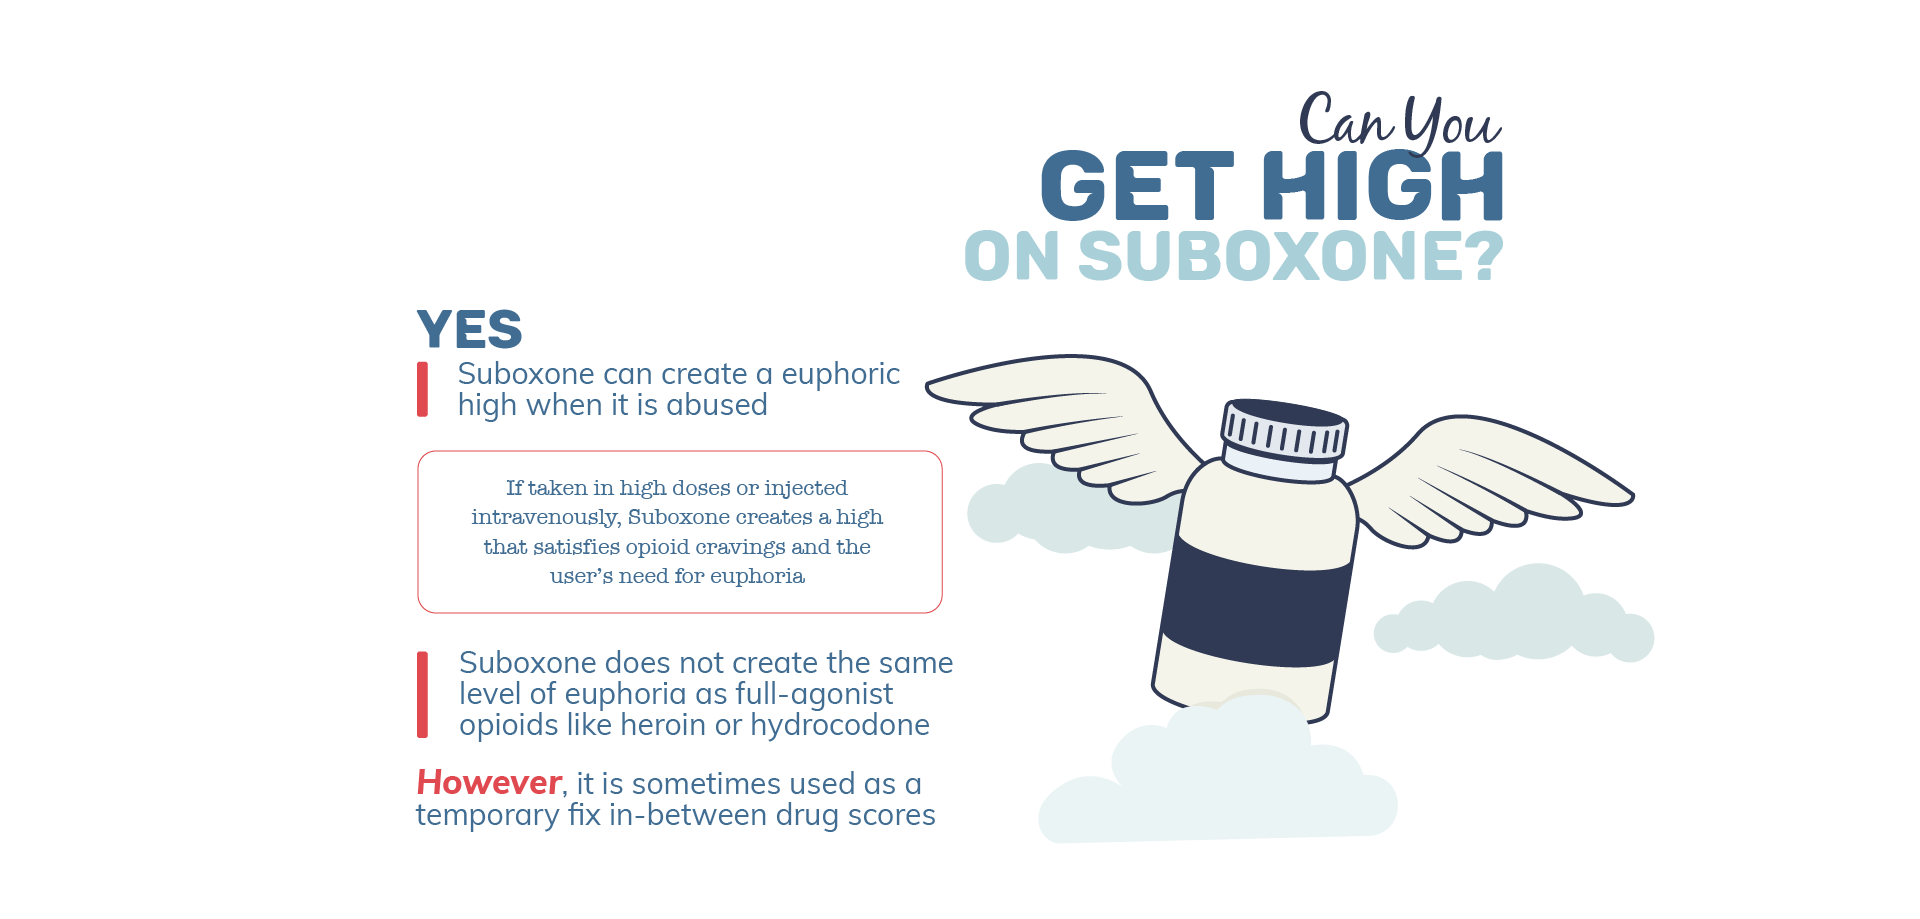 Can You Get High on Suboxone